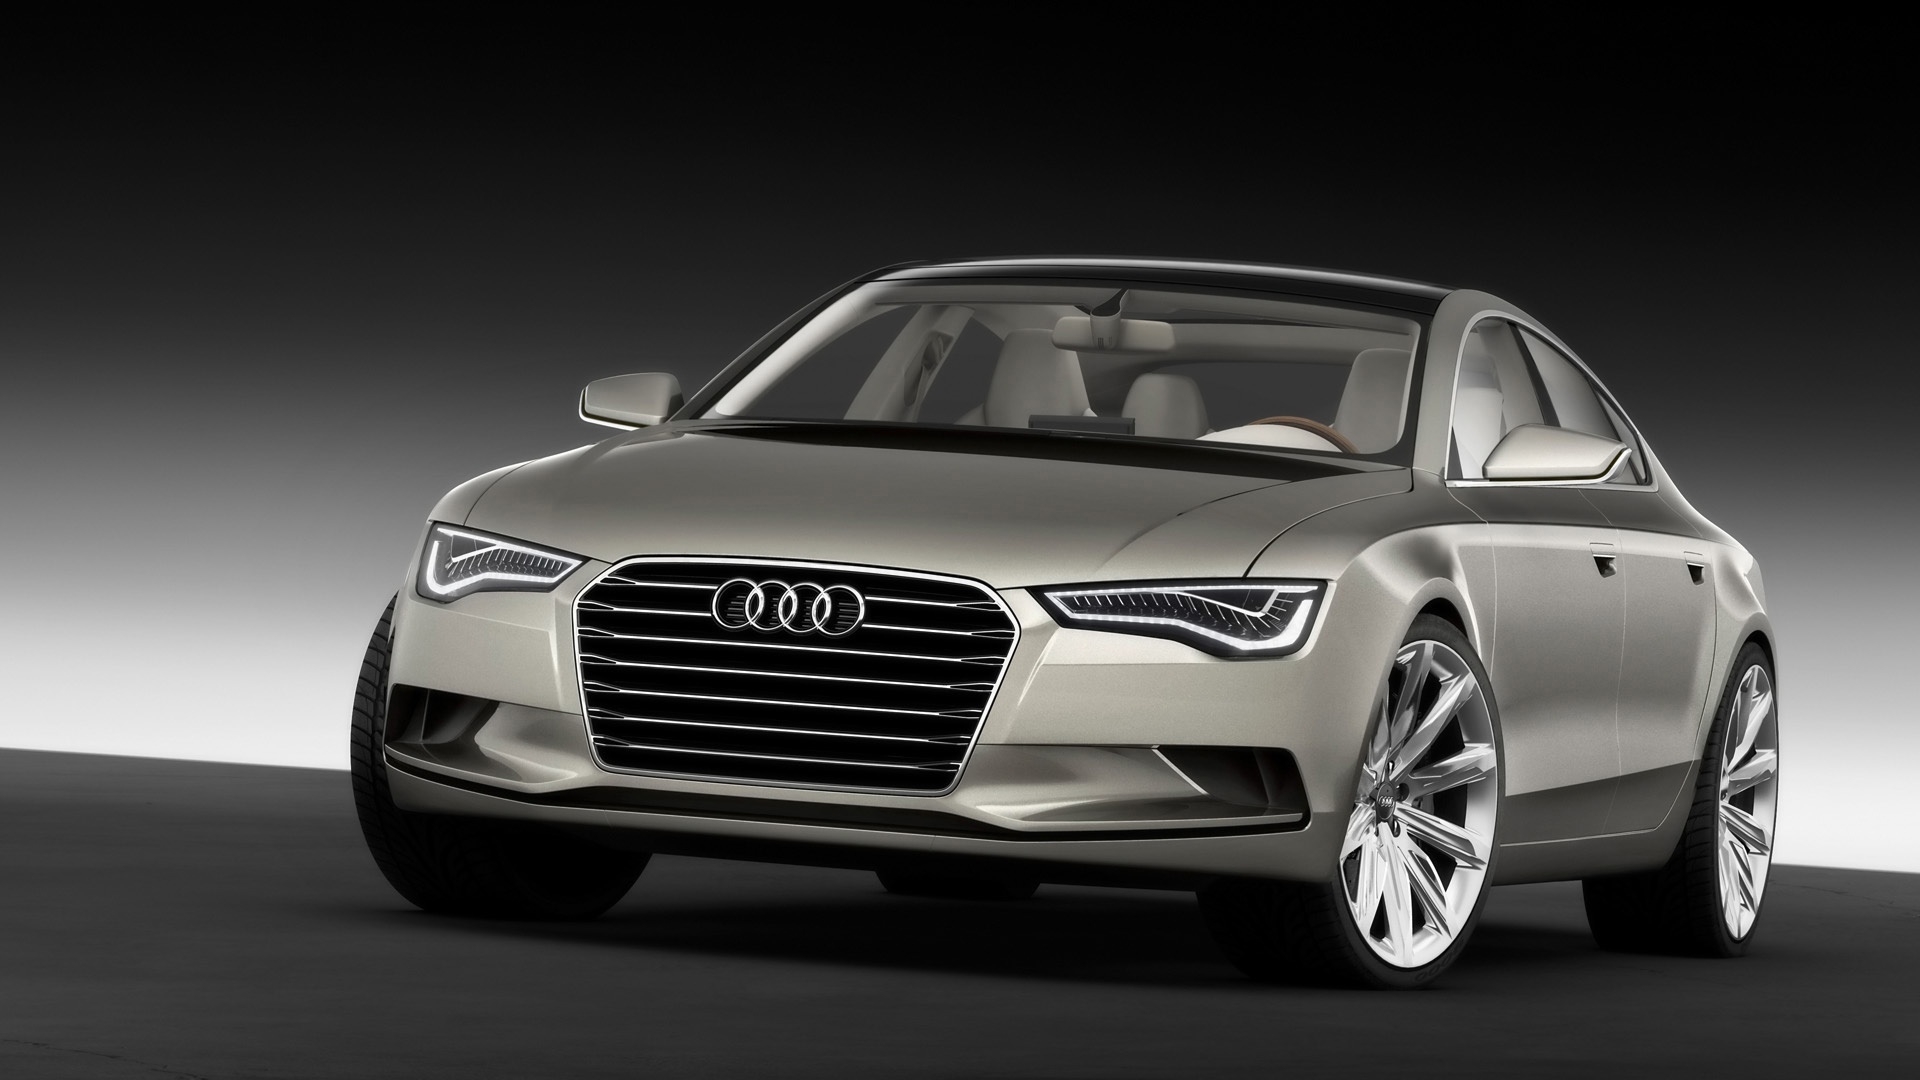 2009 Audi Sportback Concept - Front Angle for 1920 x 1080 HDTV 1080p resolution